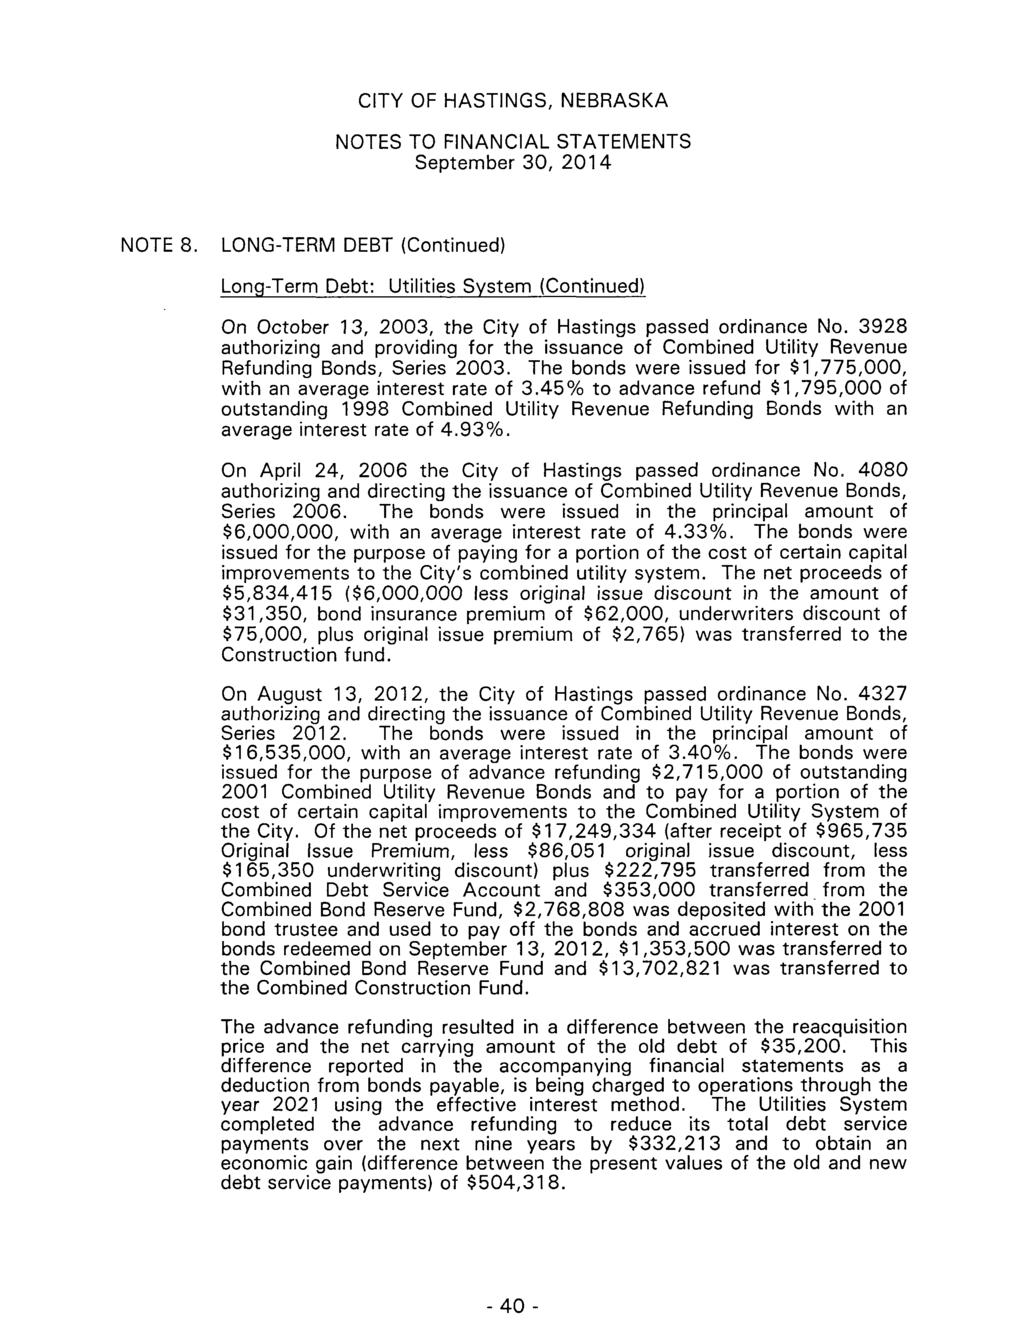 NOTES TO FINANCIAL STATEMENTS September 30, 2014 NOTE 8. LONG-TERM DEBT (Continued) Long-Term Debt: Utilities System (Continued) On October 13, 2003, the City of Hastings passed ordinance No.